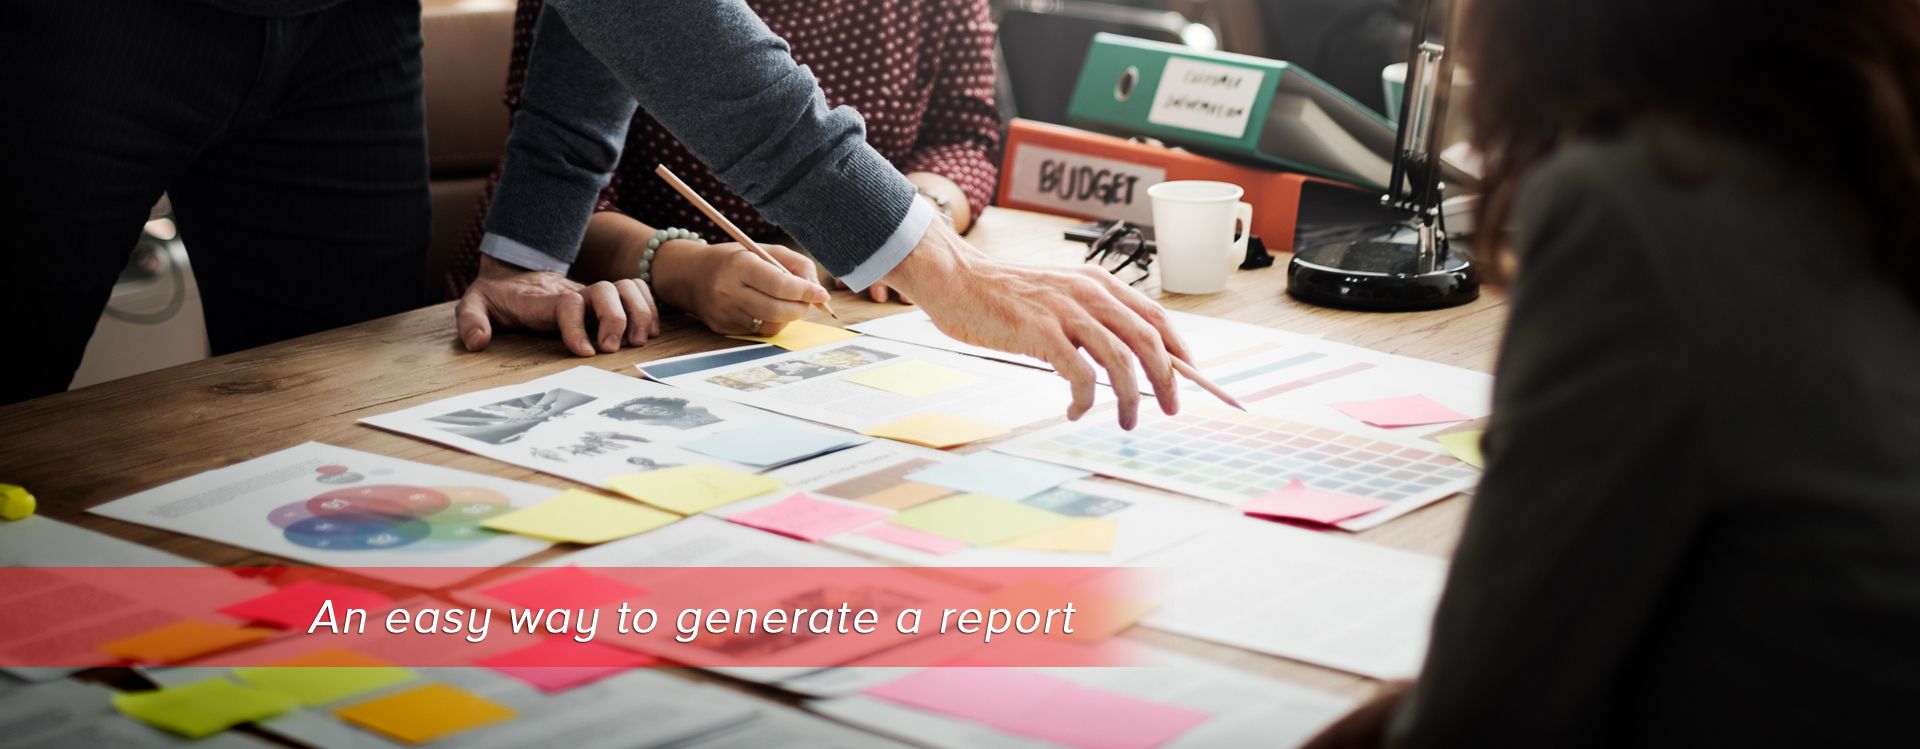 An easy way to generate a report | easy salon sofware